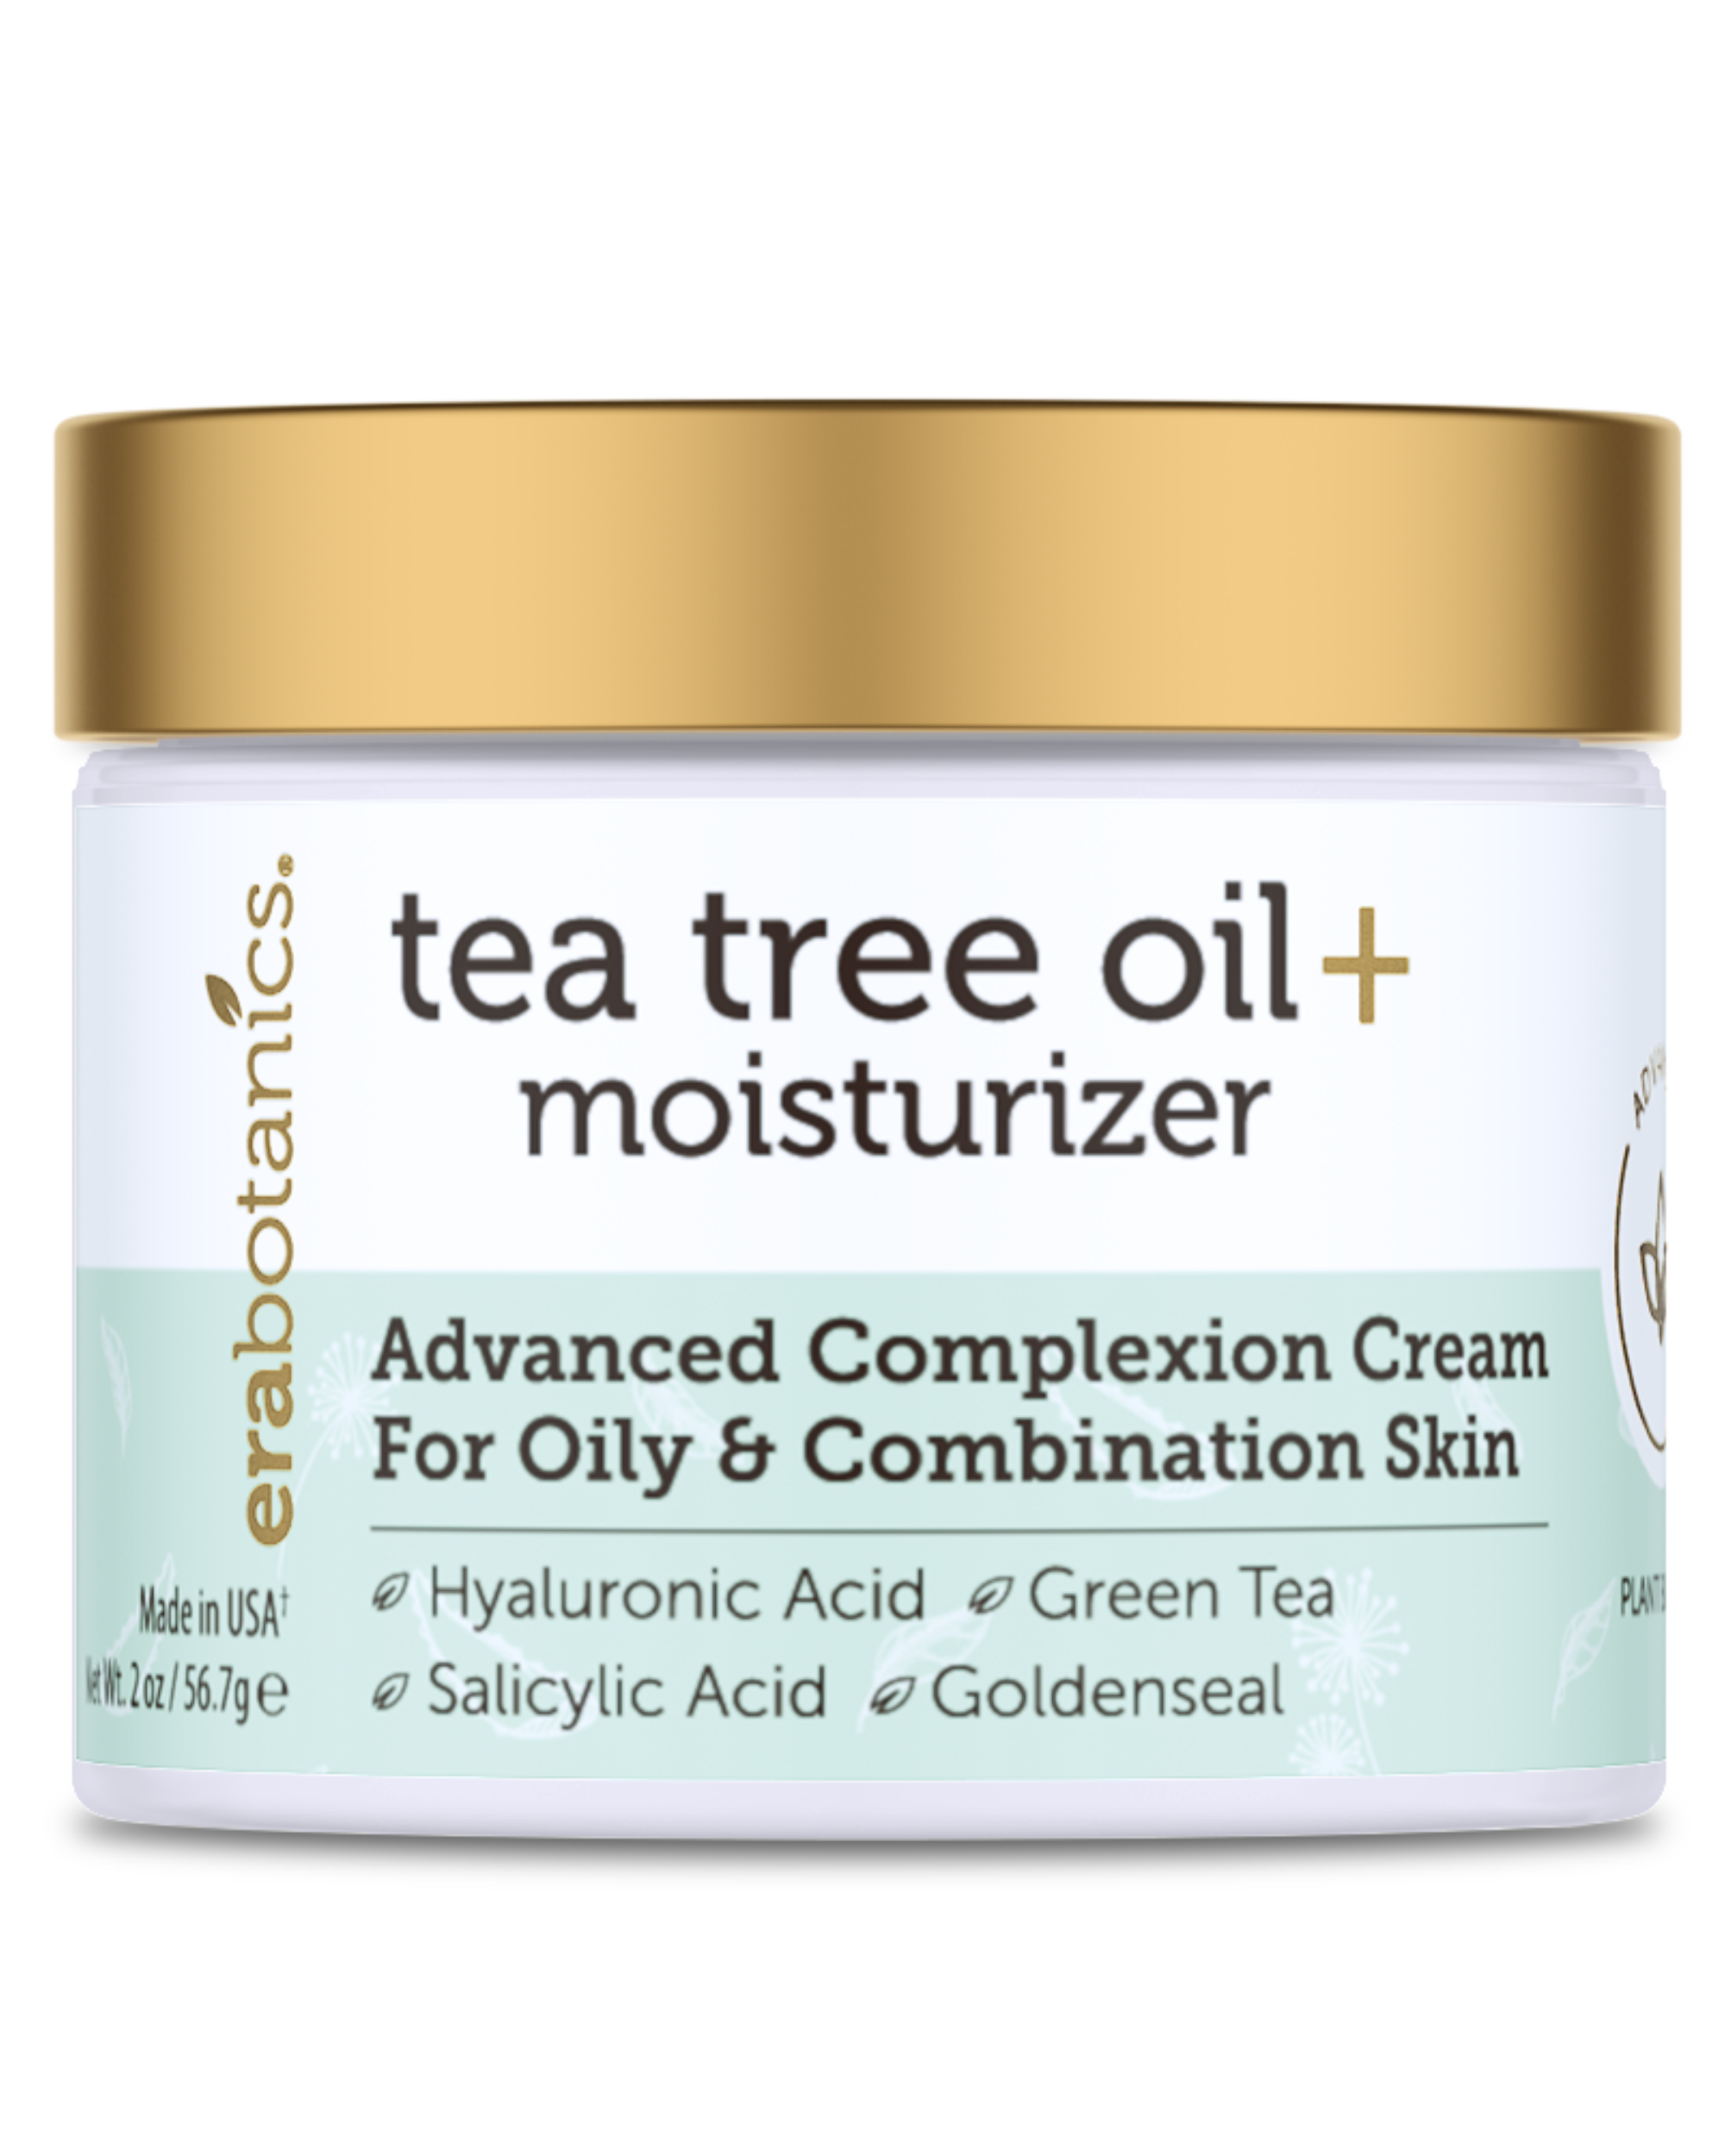 Era Organics Tea Tree Oil Face Cream - For Oily, Acne Prone Skin, Extra Soothing & Nourishing Non-Greasy Botanical Facial Moisturizer with 7X Ingredients For Rosacea, Cystic Acne, Blackheads & Redness - image 1 of 6